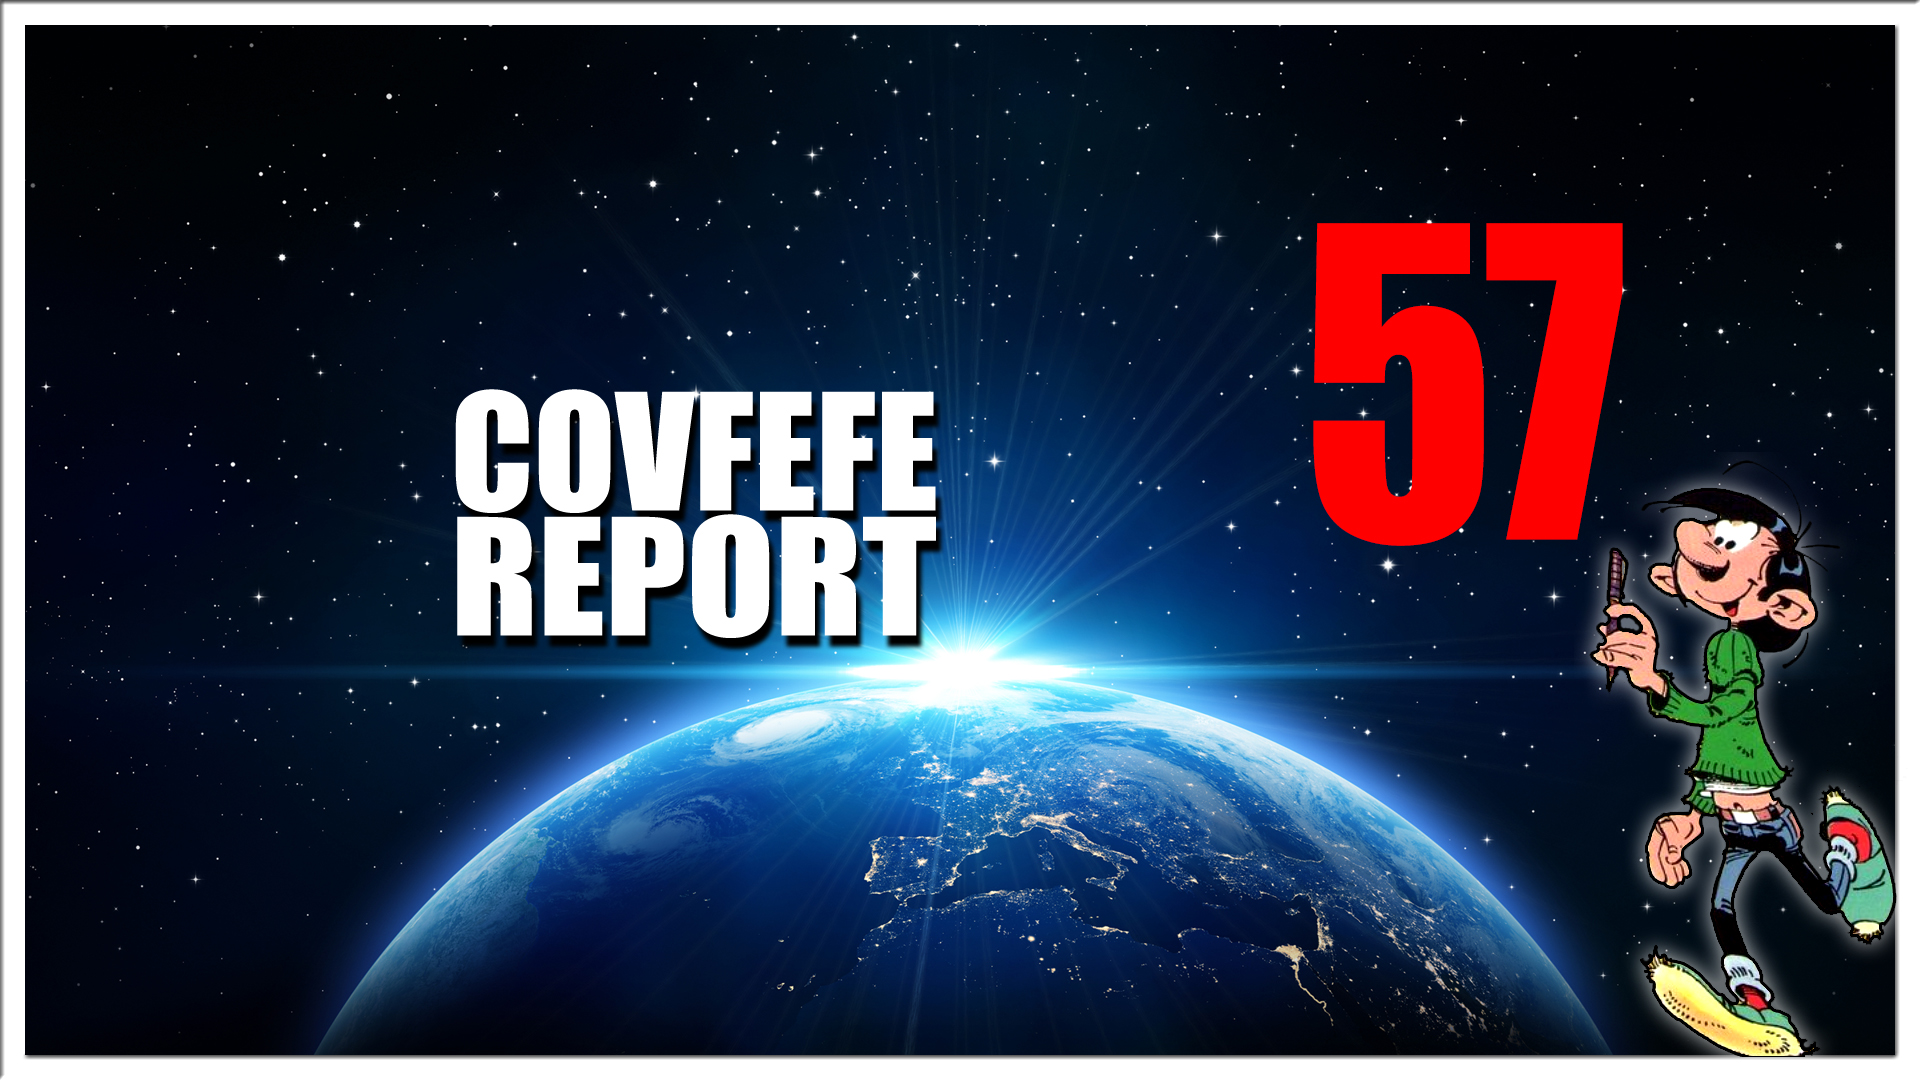 Covfefe Report 57. Operators standing by, GHCQ, Stikstofwet